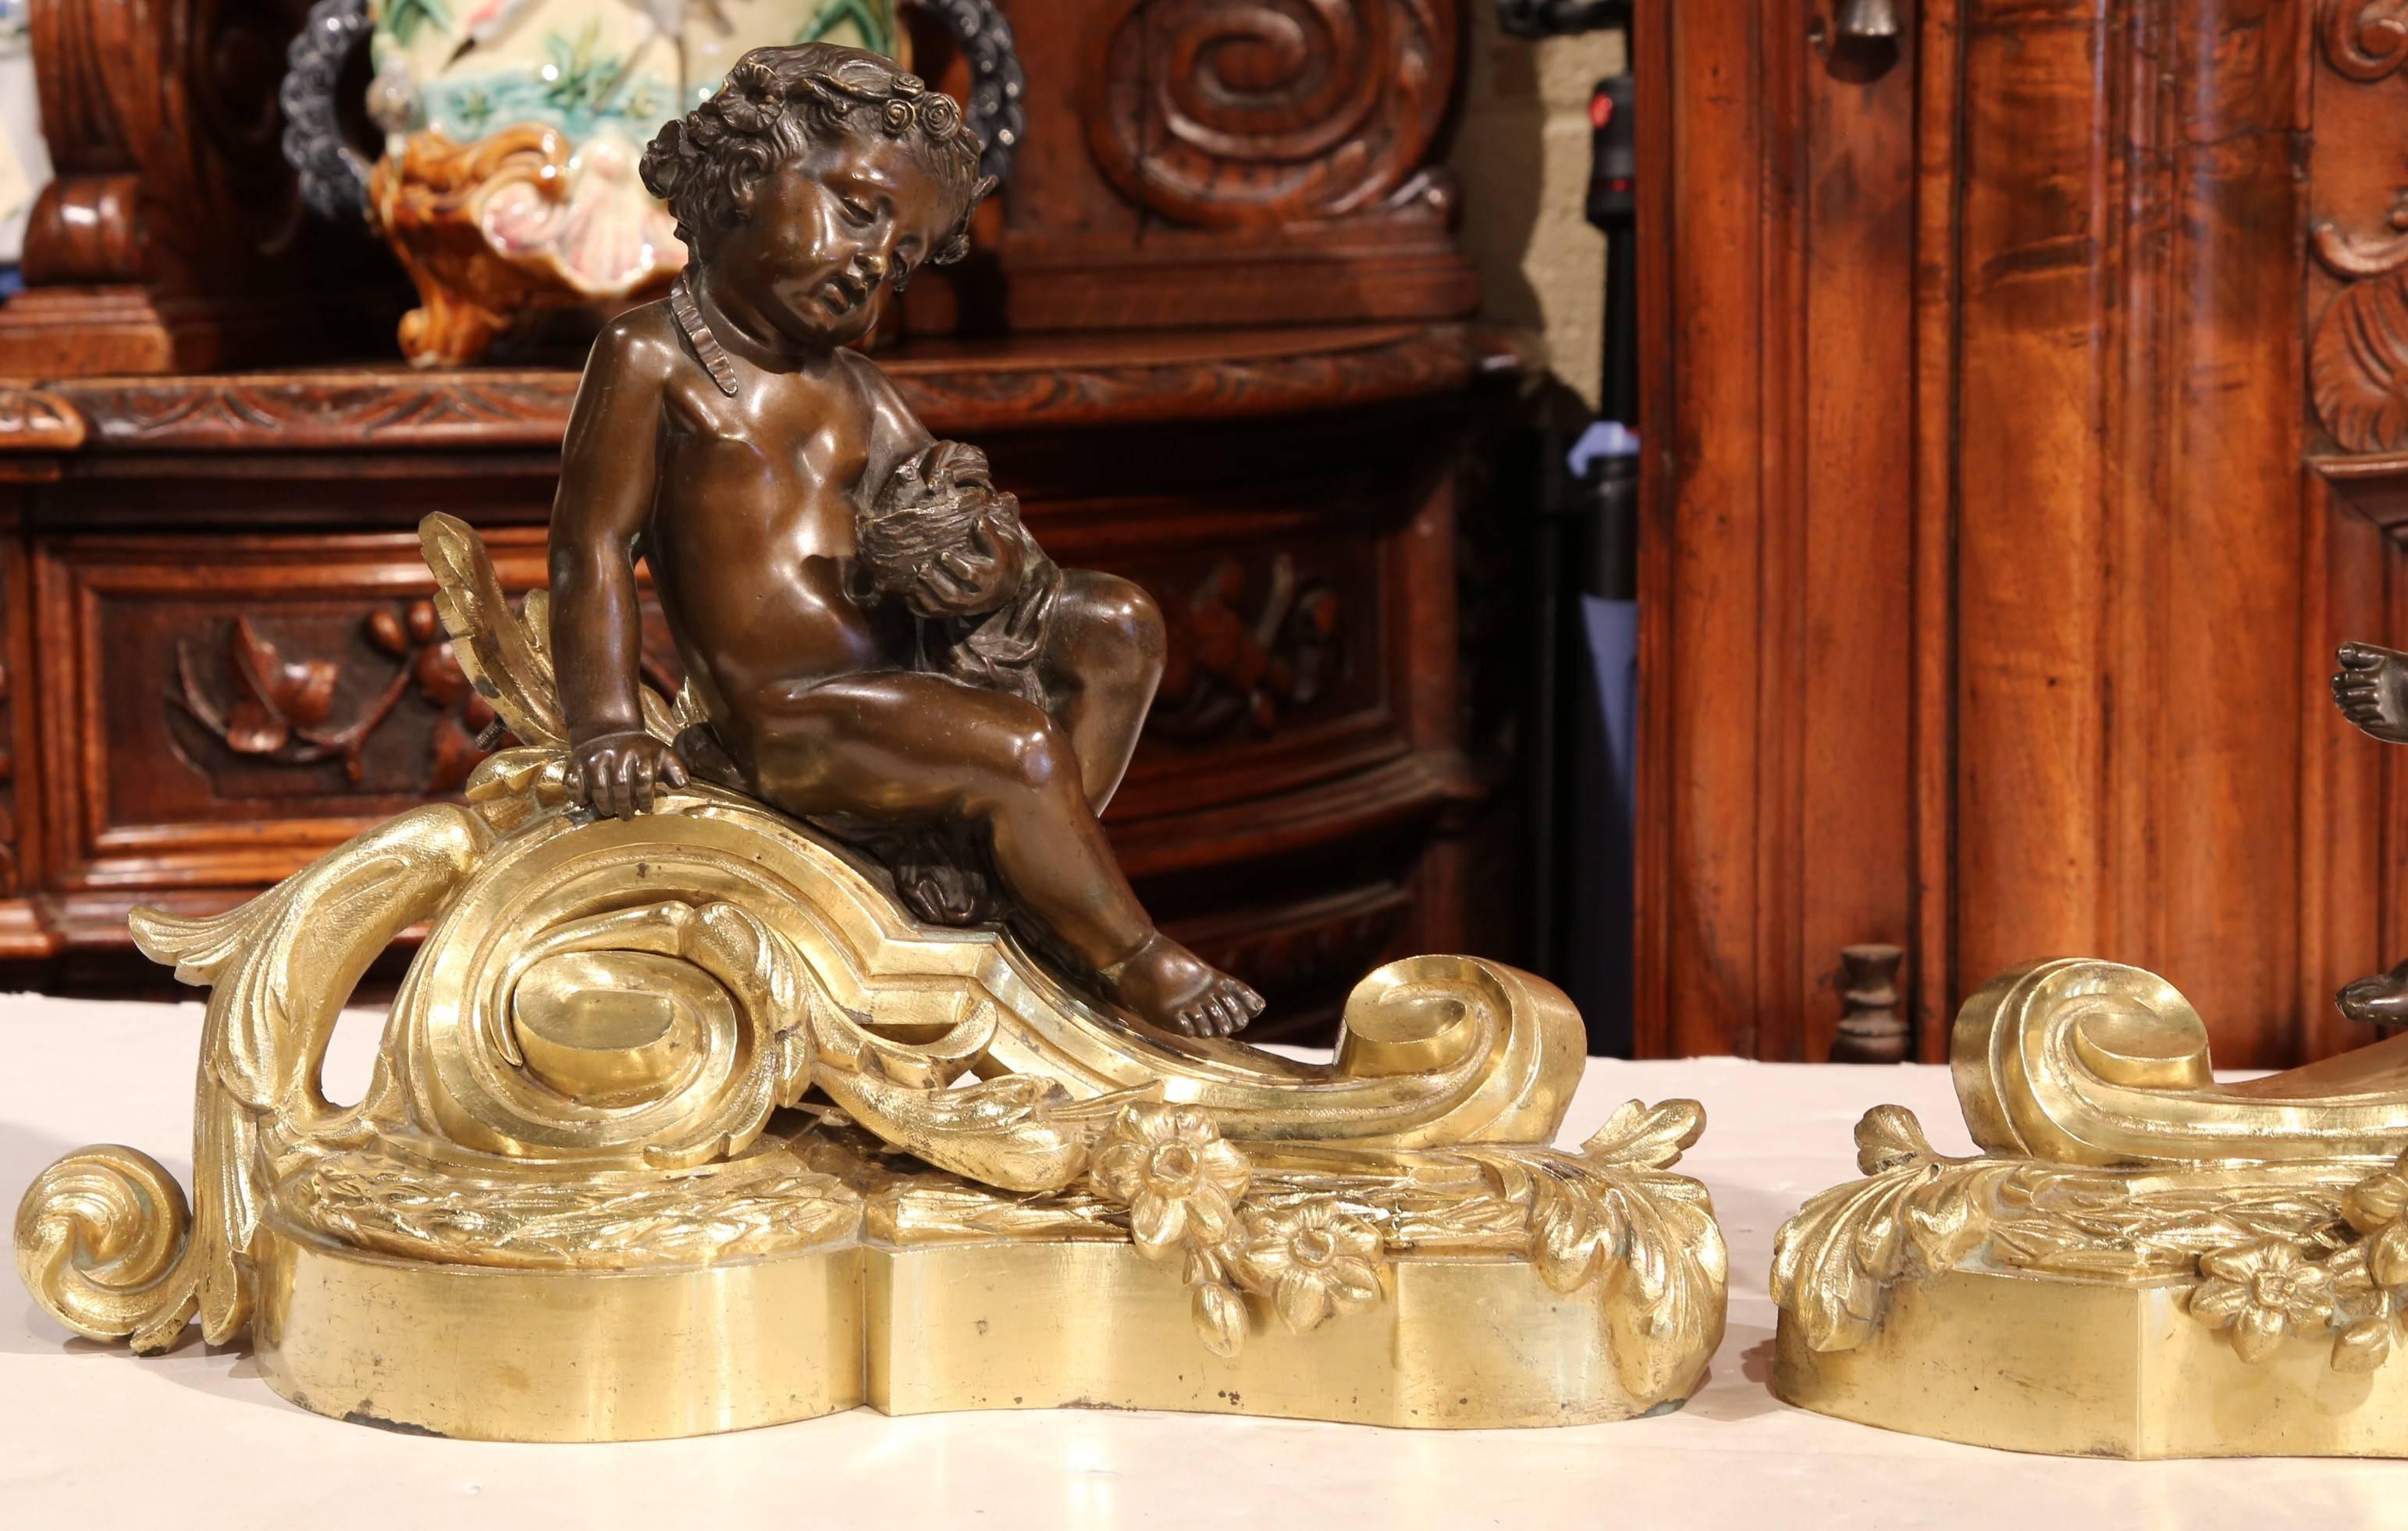 Decorate your fireplace with this elegant pair of antique patinated bronze andirons chenets. Crafted in France, circa 1840, the fireplace essentials feature a pair of cherubs seated and draped over a scrolled foliate stepped base; each cherub has